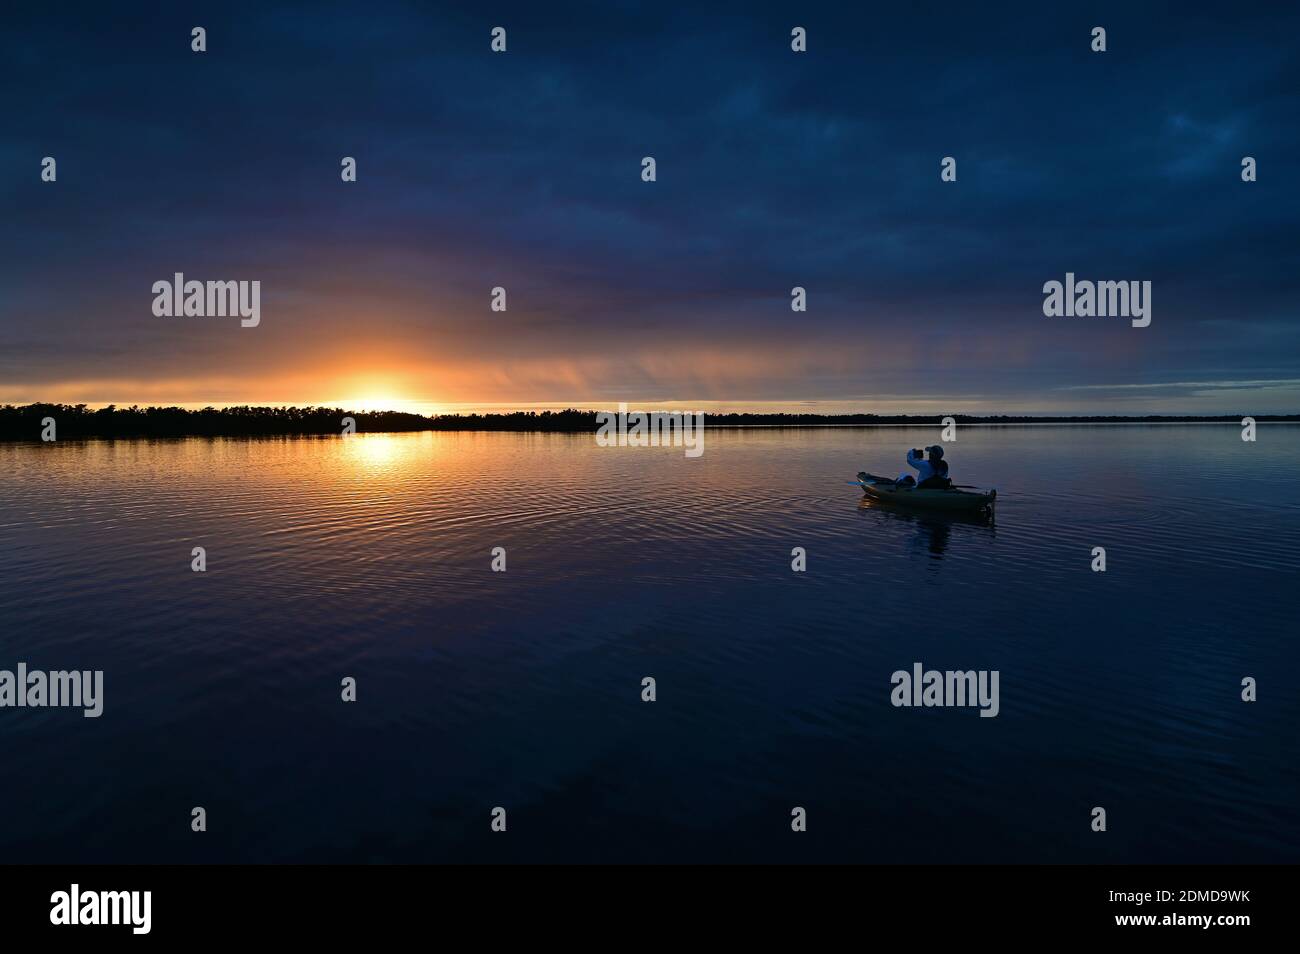 Distant kayaker at sunset on Coot Bay in Everglades National Park, Florida under winter cloudscape reflected in tranquil water. Stock Photo